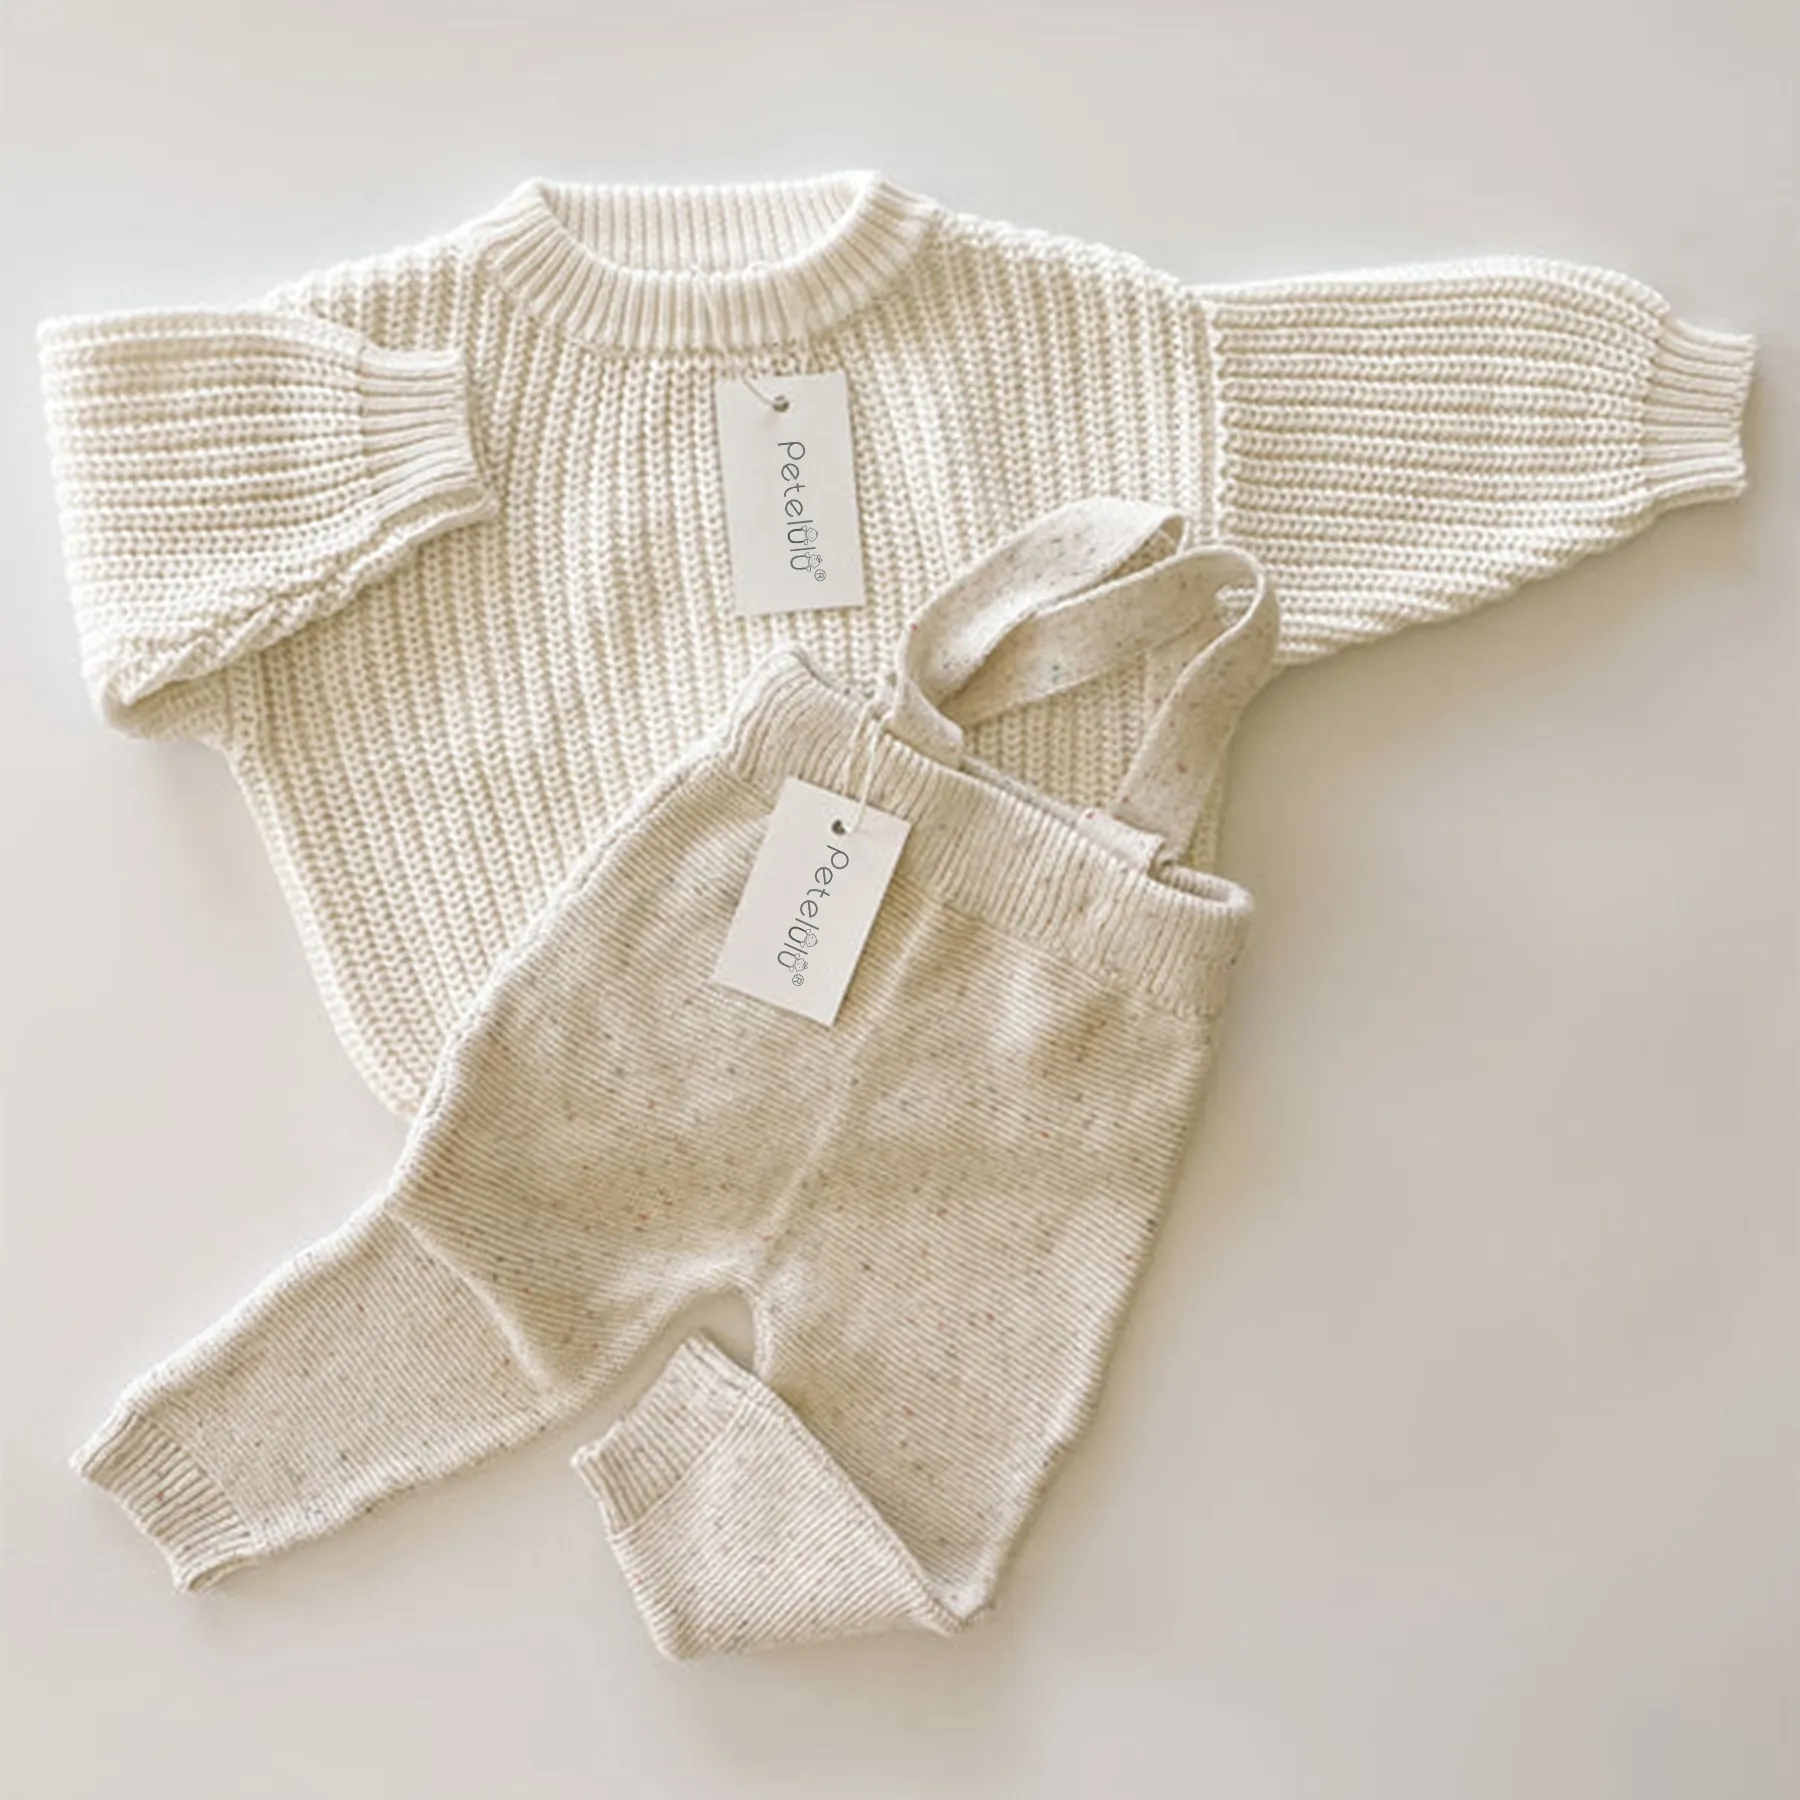 Best Selling Baby Knitted Sweater Children Boys Girls Overalls Ribbed Cotton Toddler Baby Sweater set